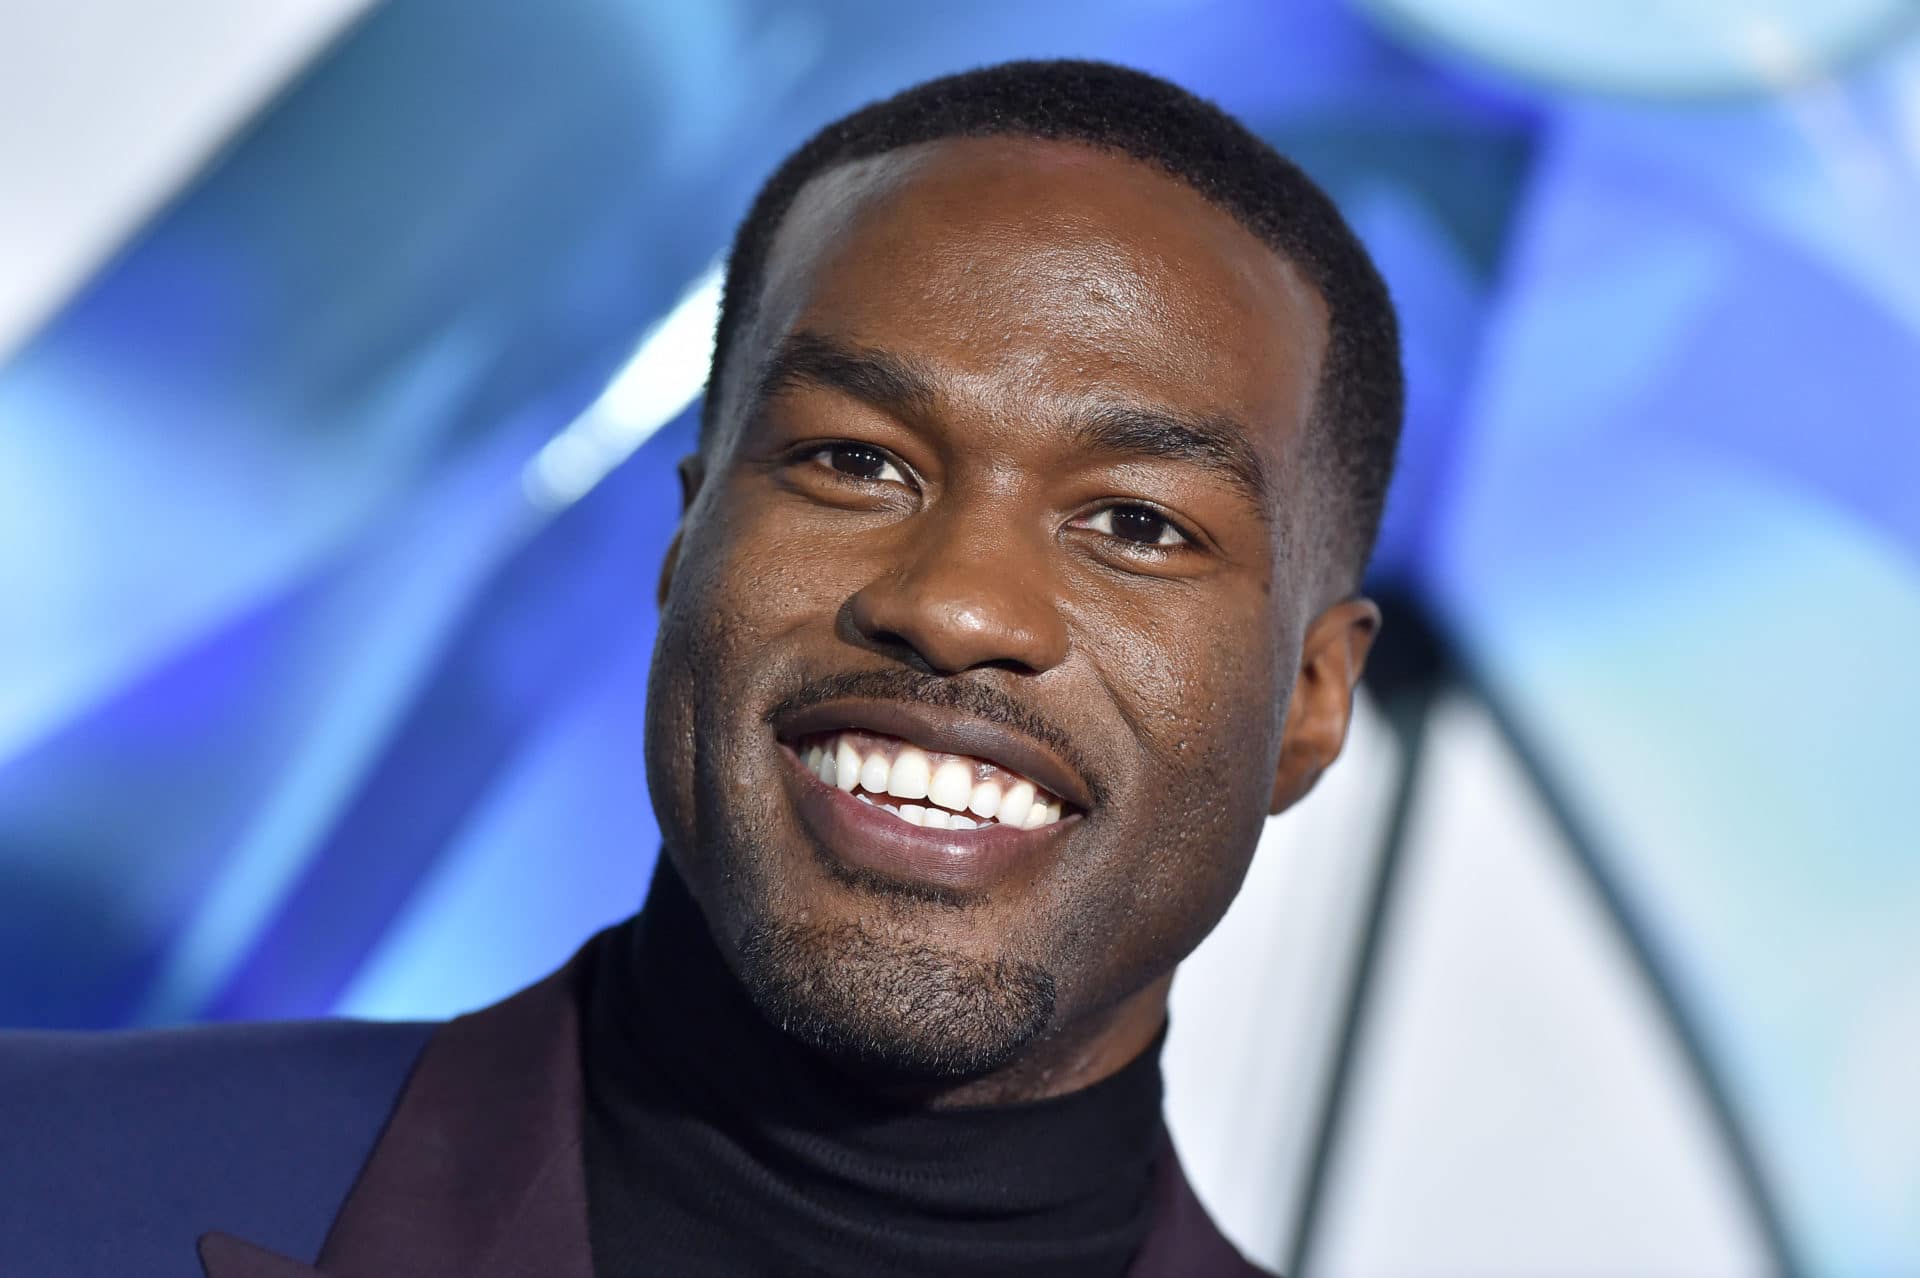 5 Things To Know About 'Aquaman' Star Yahya Abdul-Mateen II